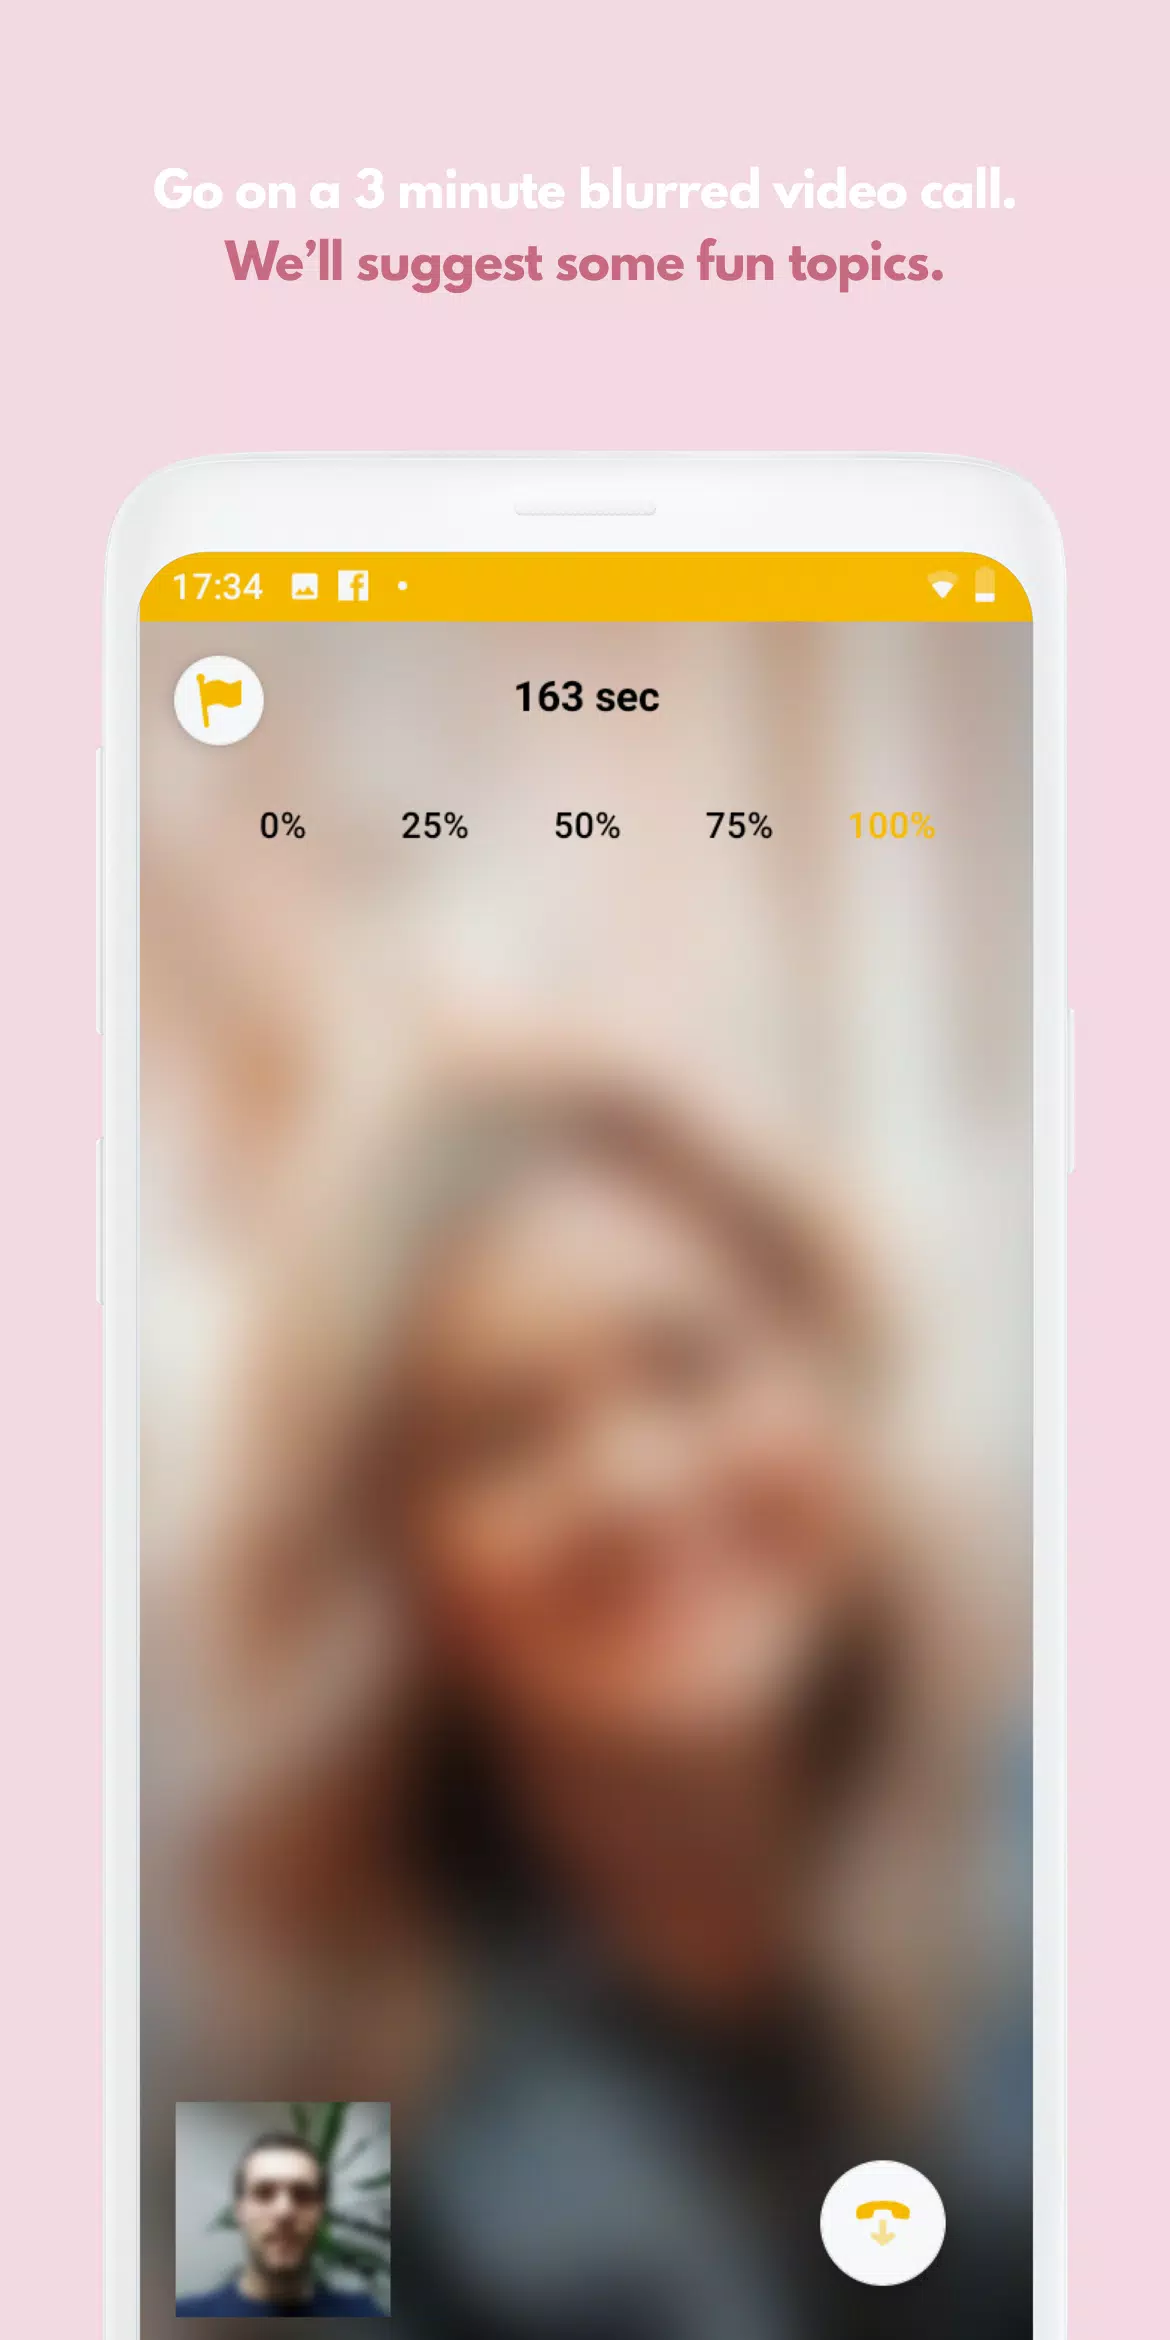 Blind Date - DatingScroll.com APK for Android Download